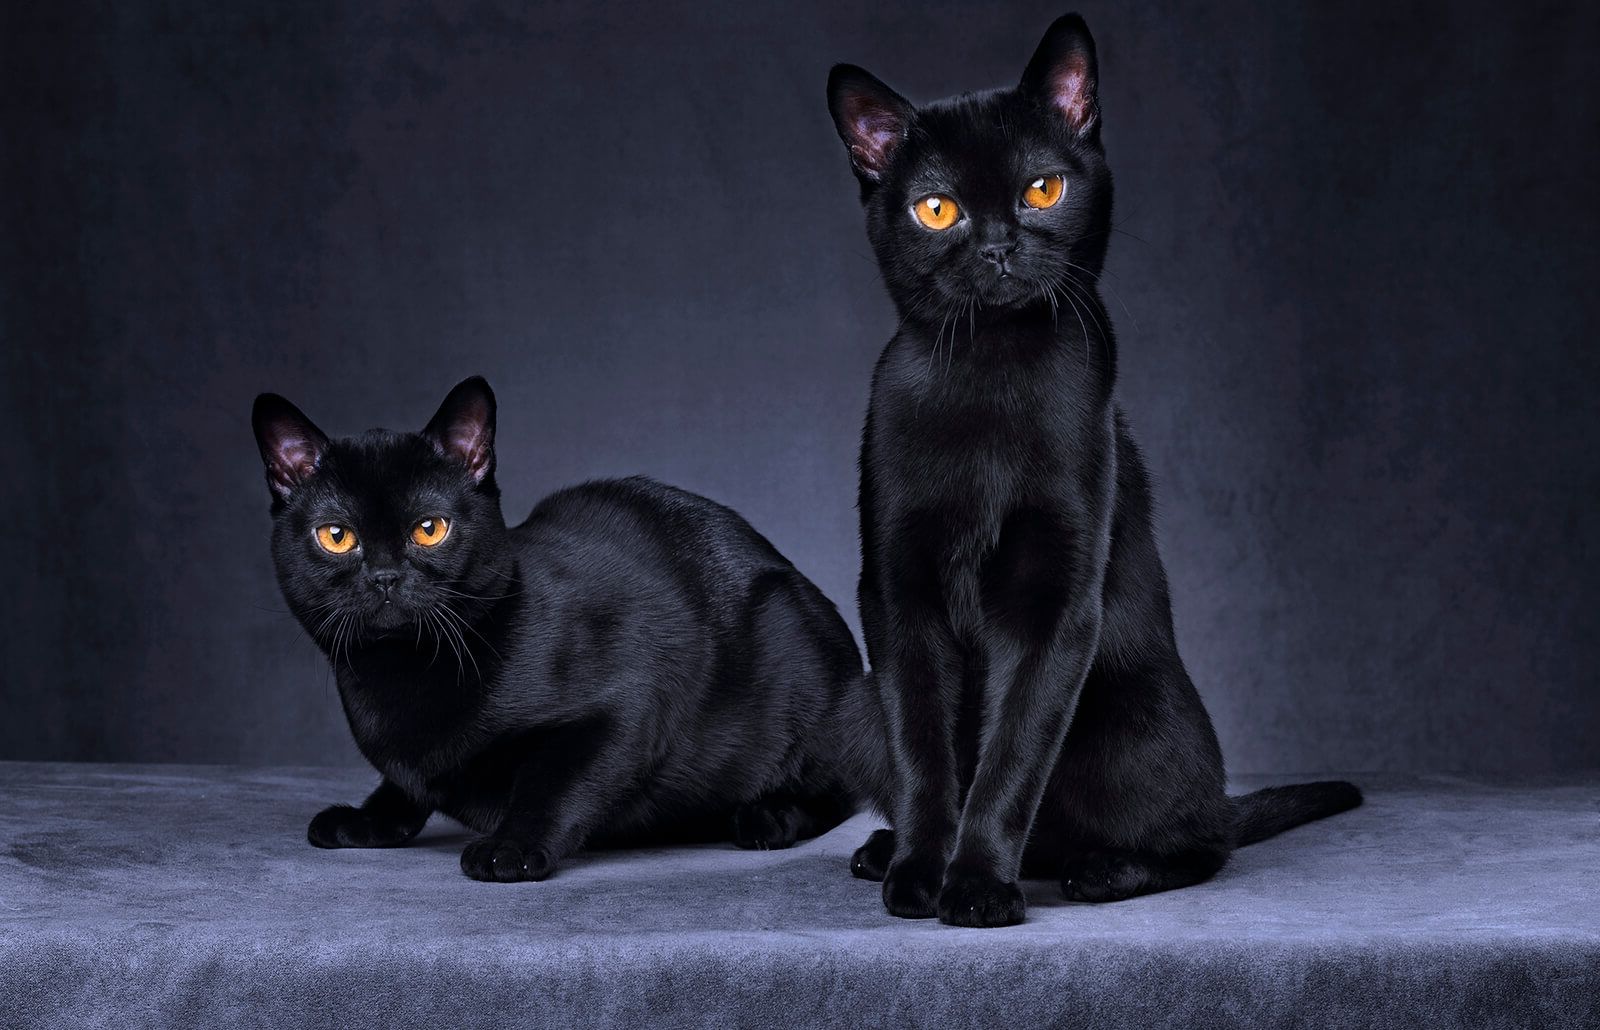 BOMBAY MOST POPULAR CAT BREEDS IN THE WORLD